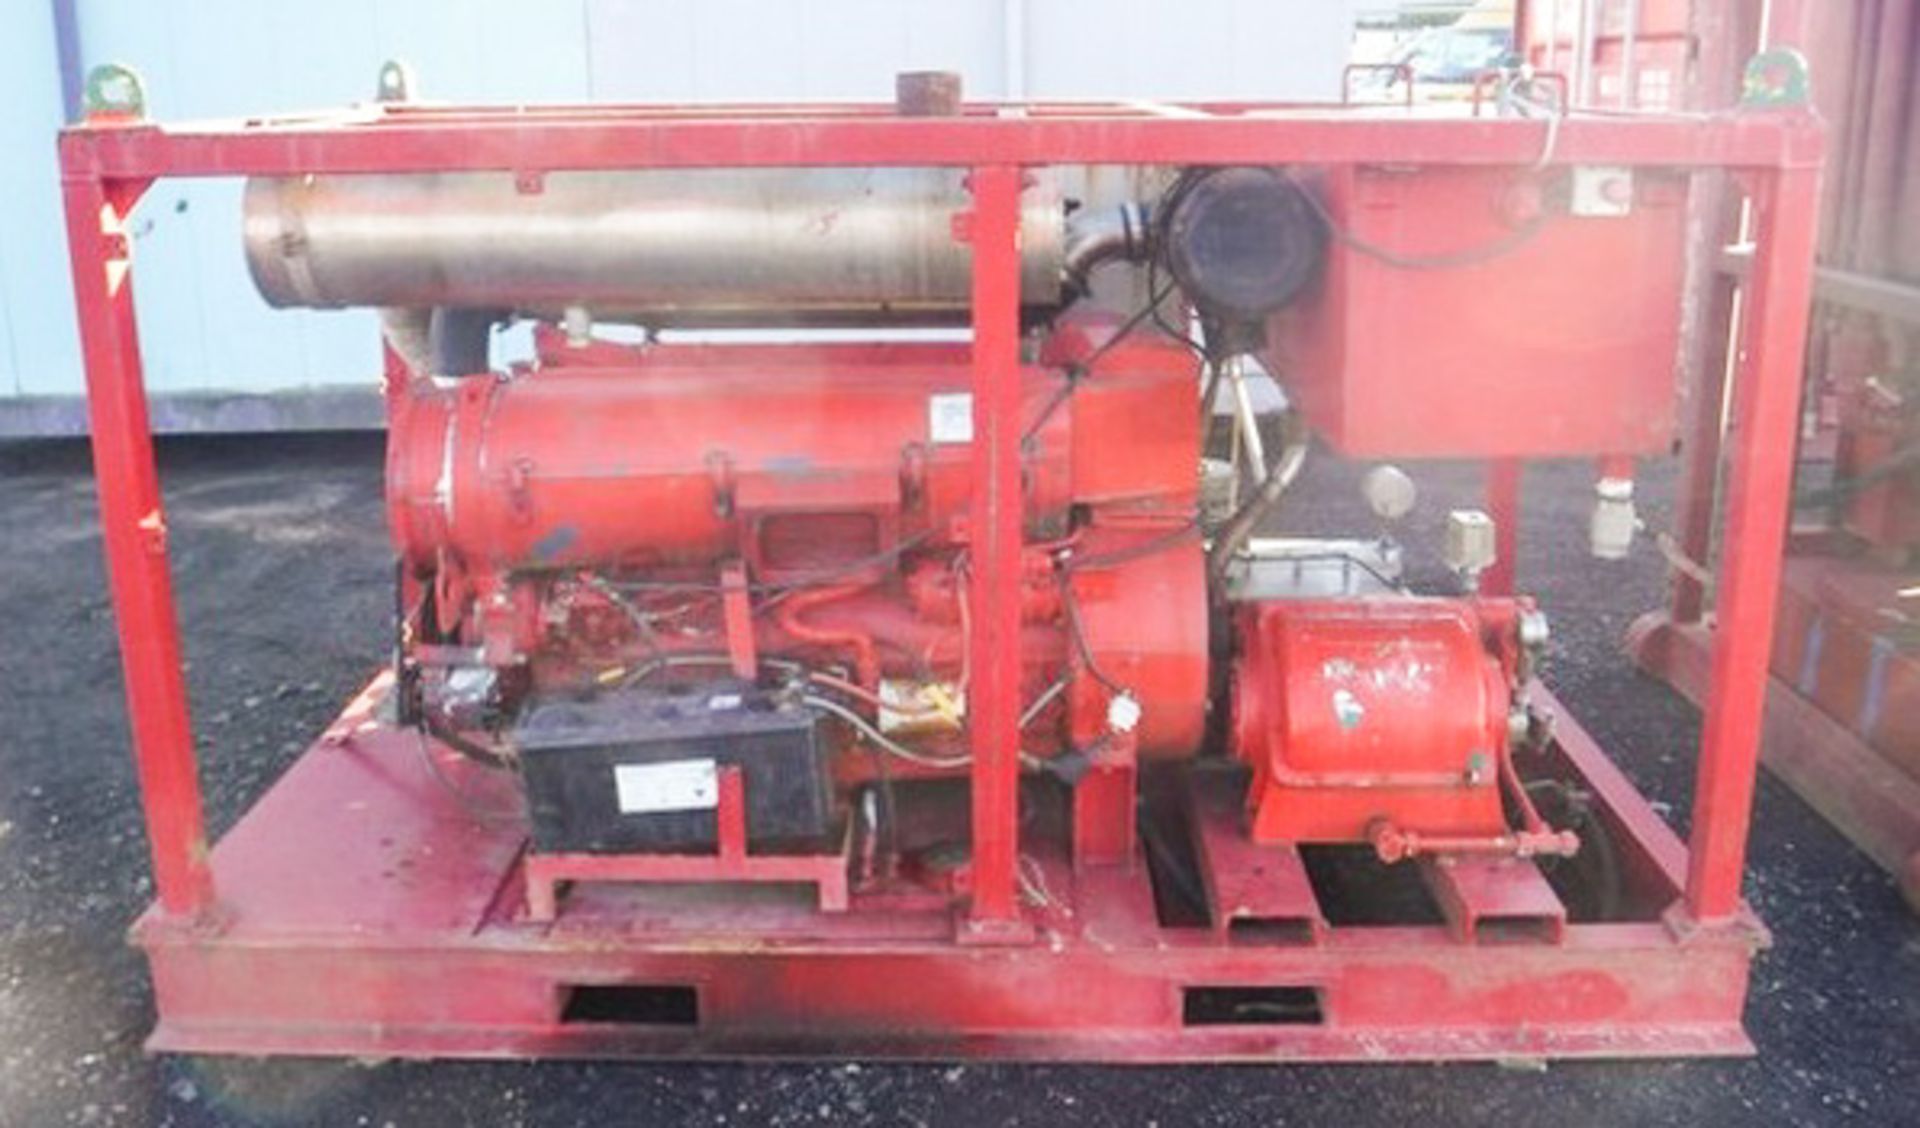 V8 HIGH PRESSURE HYDRAULIC PUMP SKID MOUNTED. (RED), NO PLATES OR ID NUMBERS - Image 2 of 3